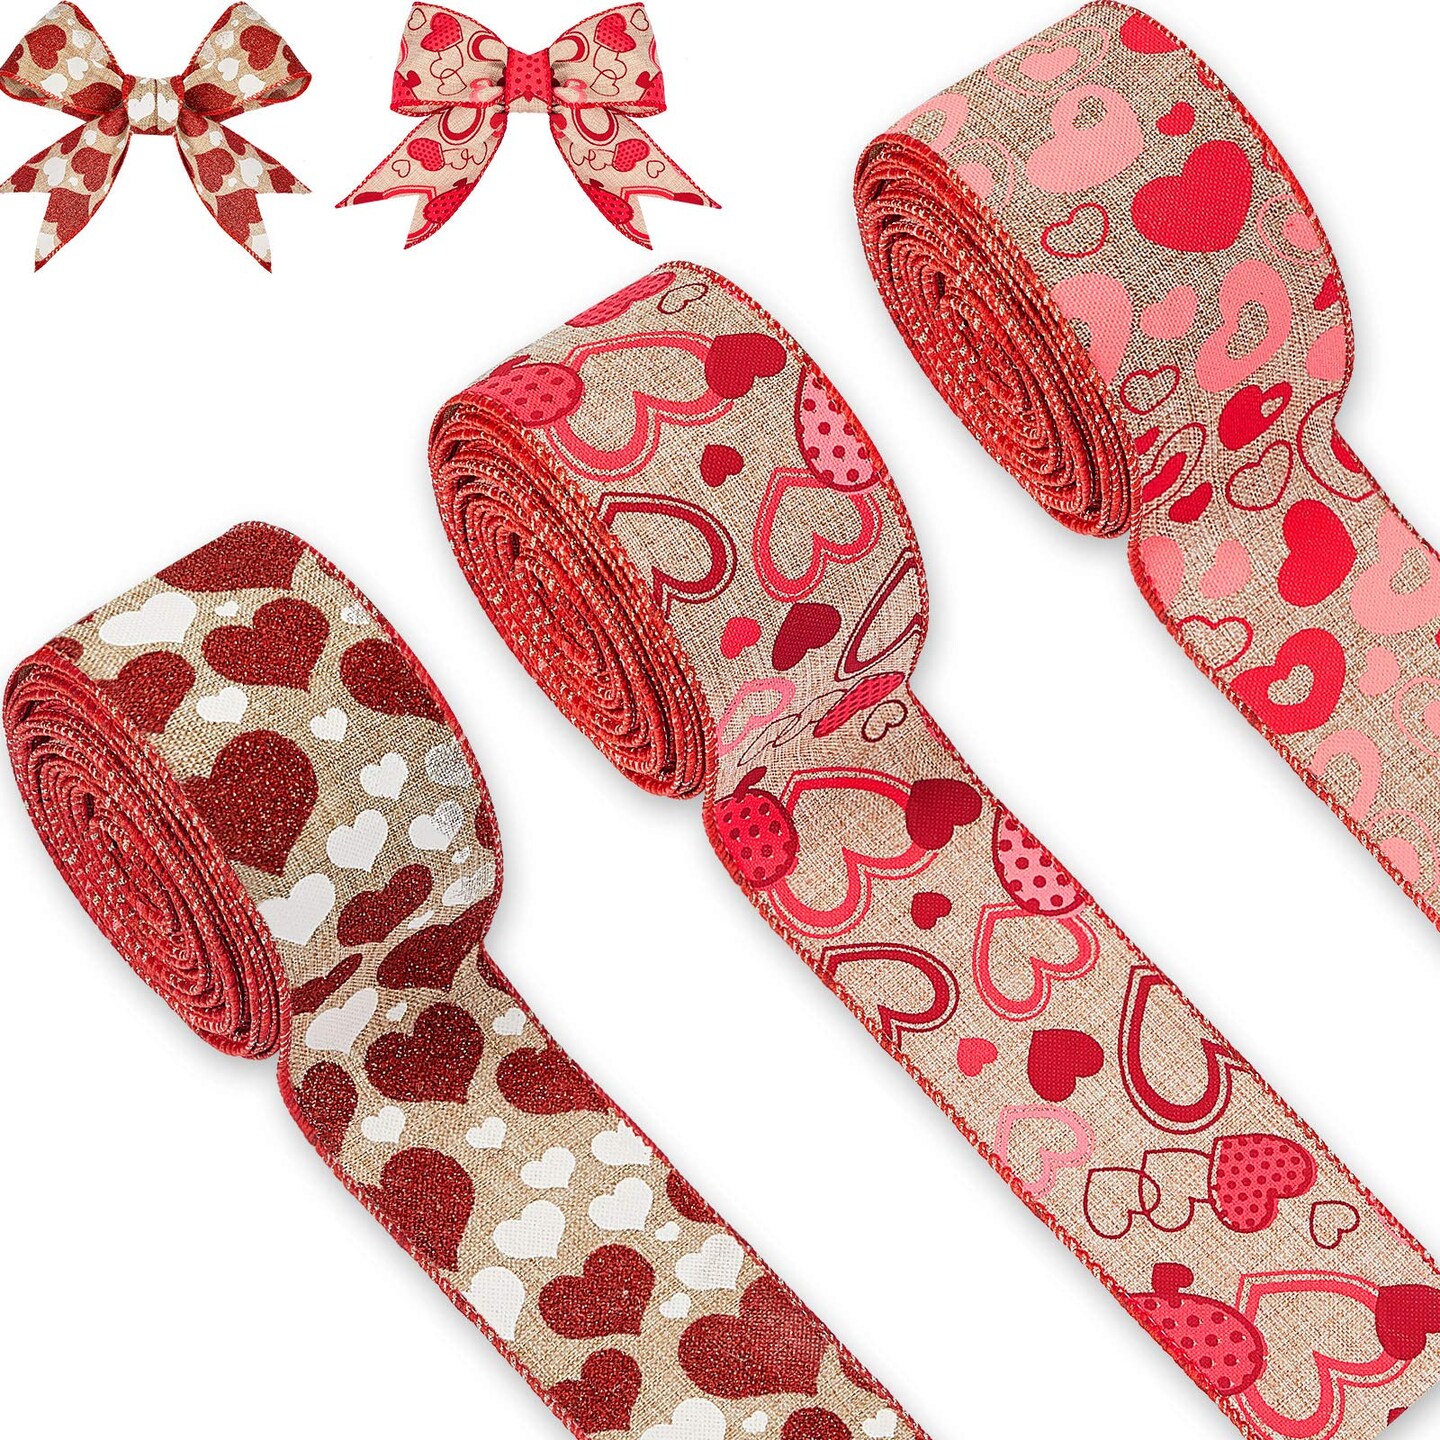 3 Rolls 30 Yards Valentine&#x27;s Day Heart Canvas Ribbons Patterned Hearts Burlap Wired Edge Ribbon Valentine&#x27;s Day Ornament Hanging Decorations for DIY Wrapping Crafts Decor